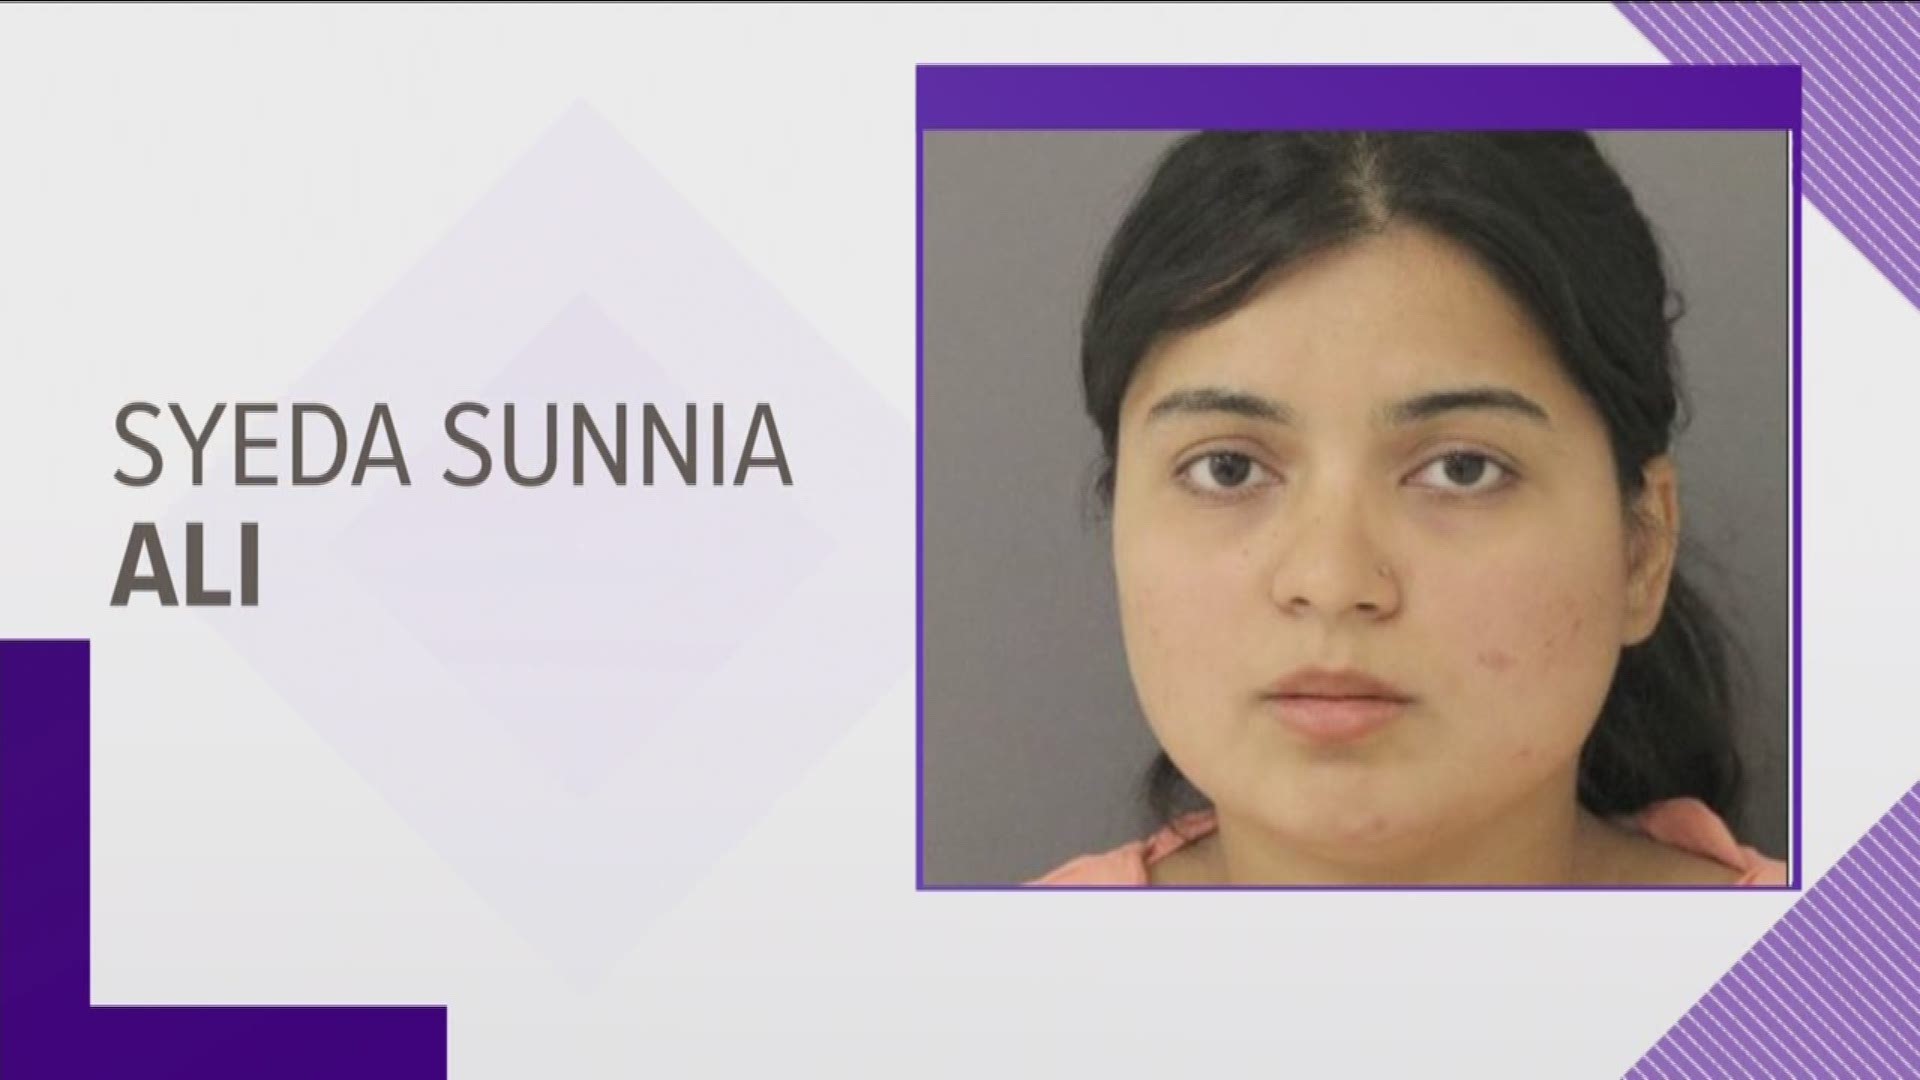 Officials say the 27-year-old teacher allegedly assaulted the four-year-old student on July 5 at Minnieland Academy in Woodbridge.